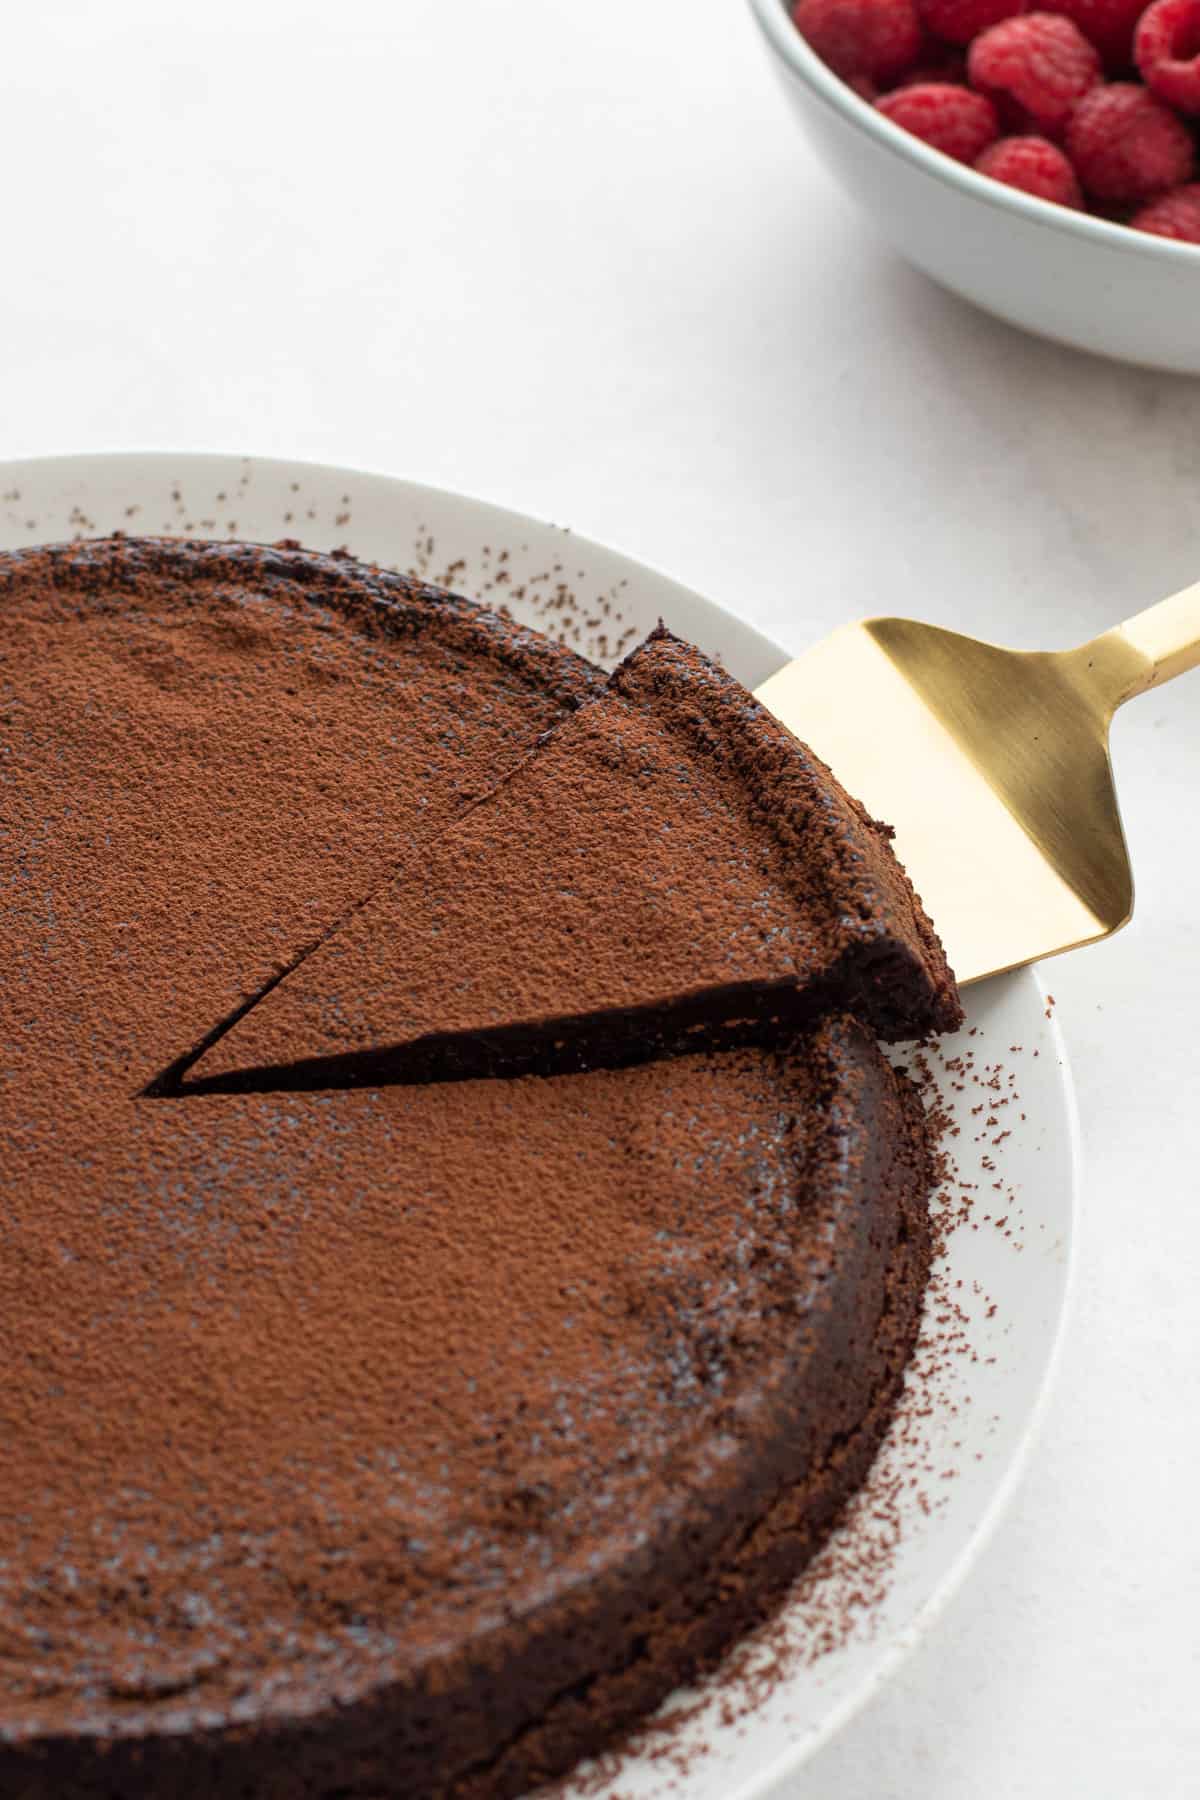 A slice of paleo chocolate cake on a plate with a dusting of cocoa powder on top.